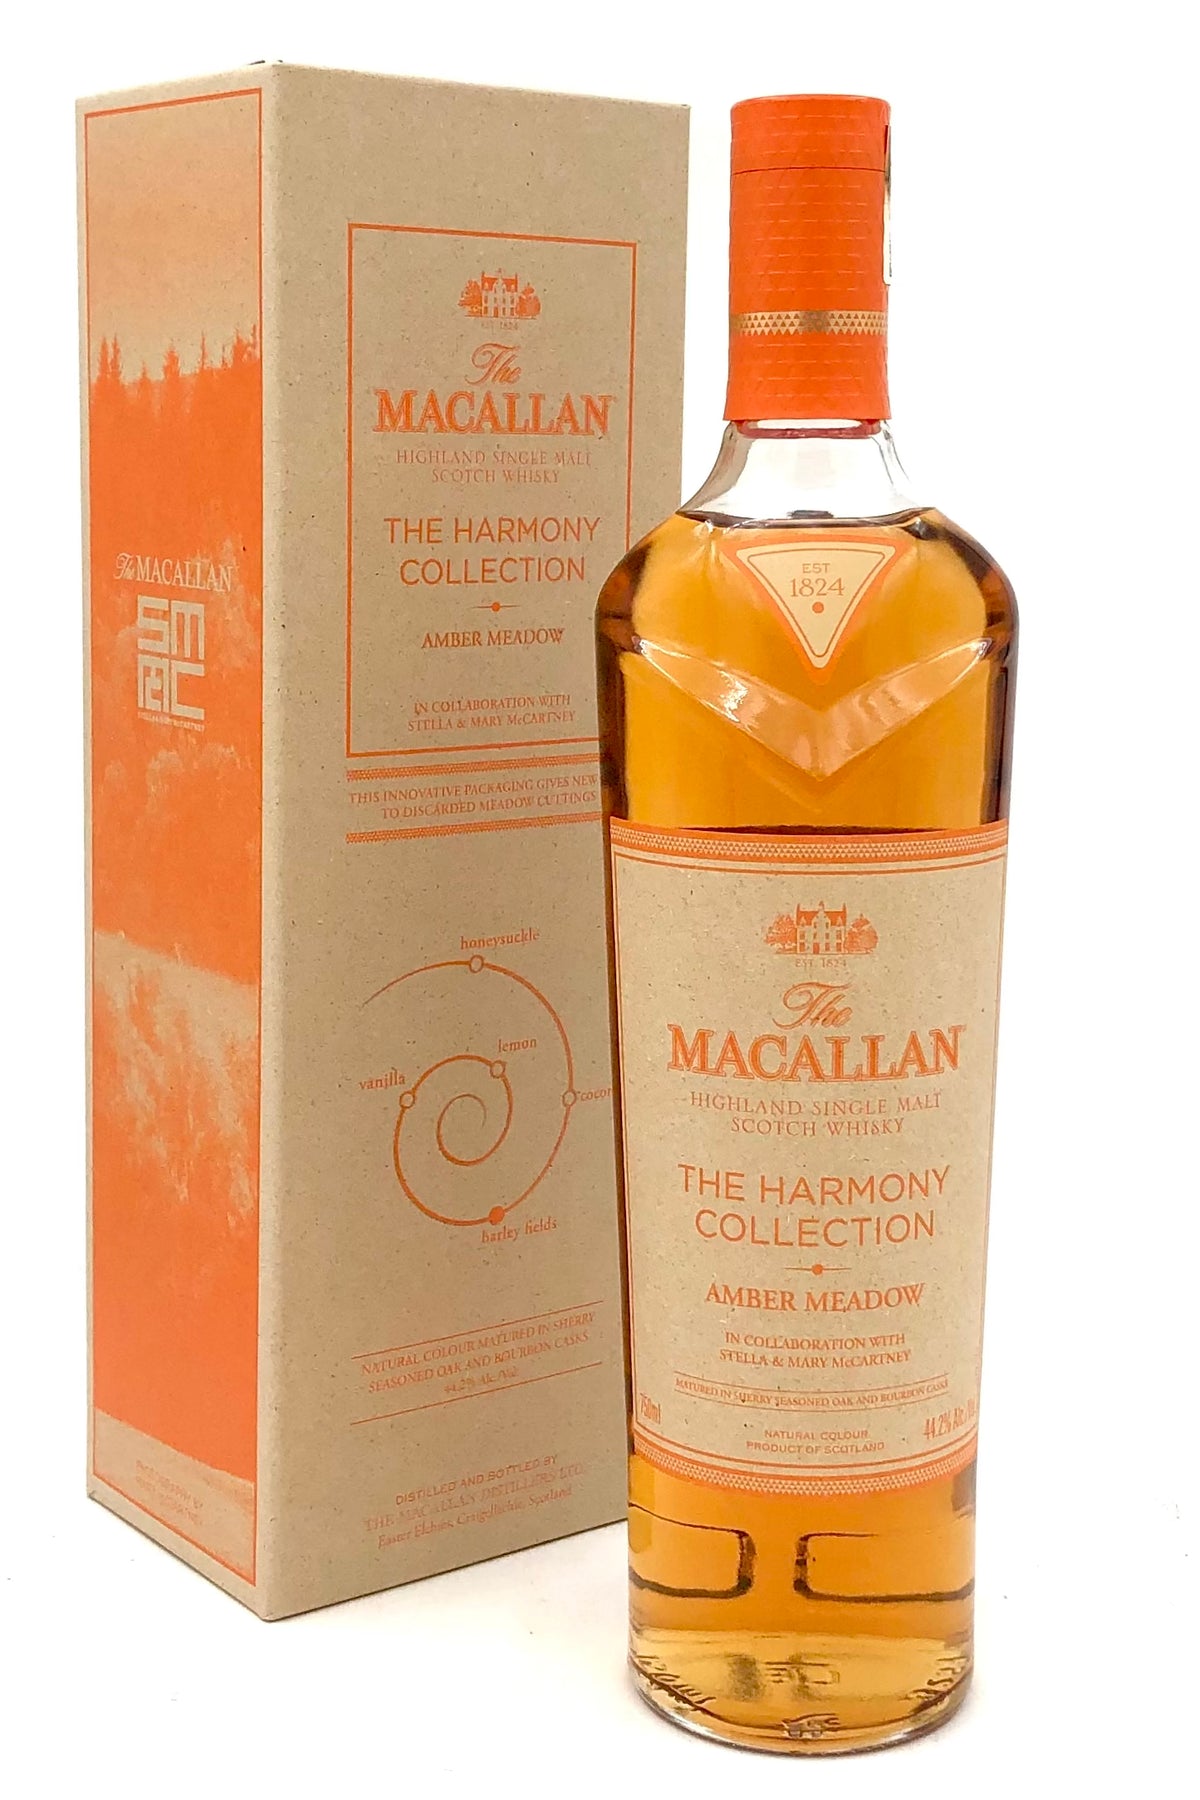 The Macallan &quot;The Harmony Collection III: Amber Meadow&quot; Single Malt Scotch Whisky